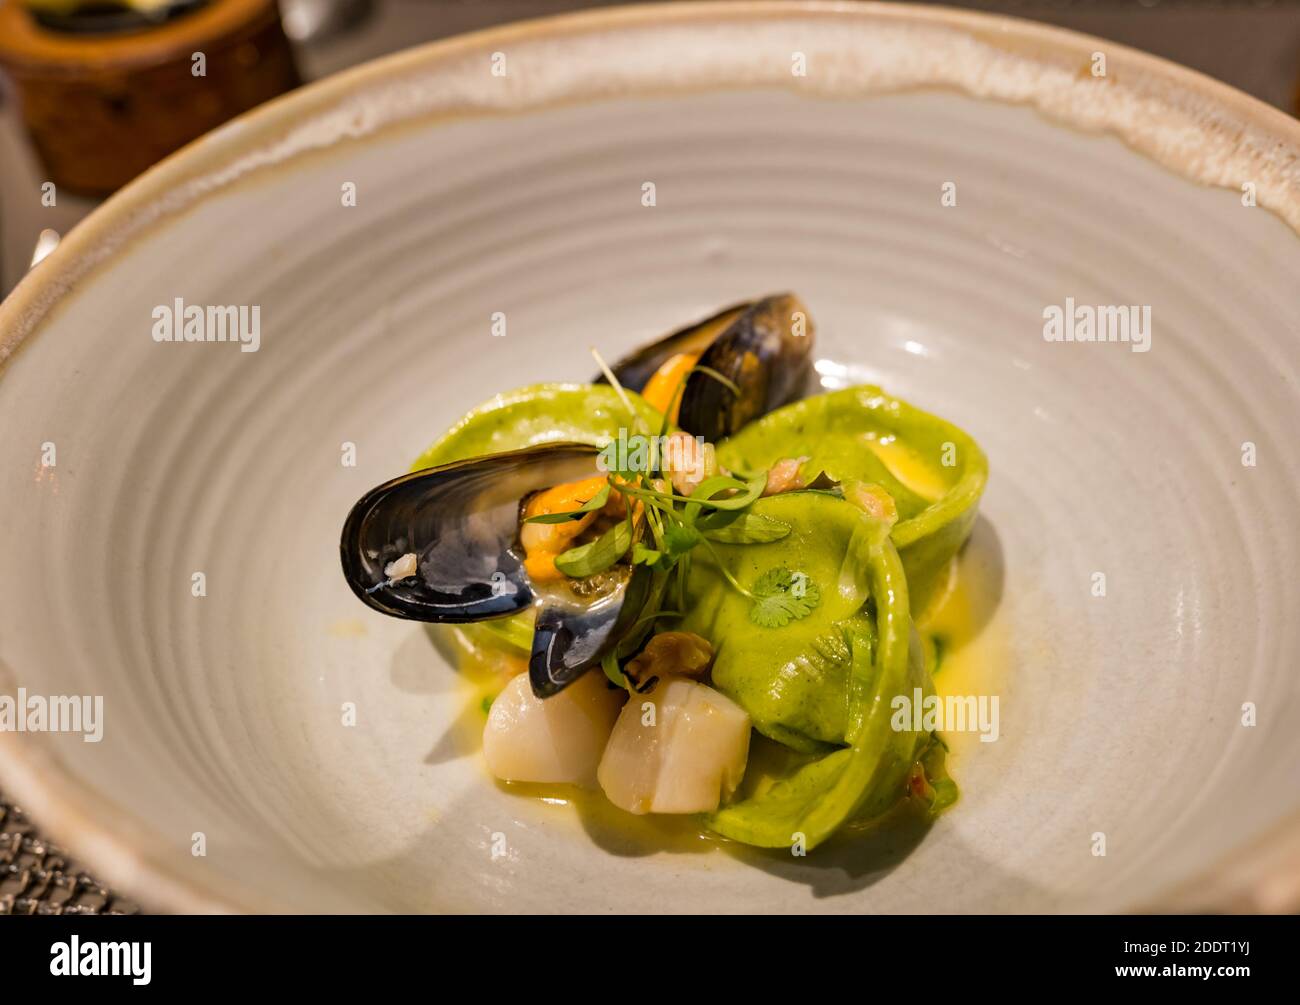 Michelin star fine dining plate of food: scallops and mussels with tortellini pasta Stock Photo